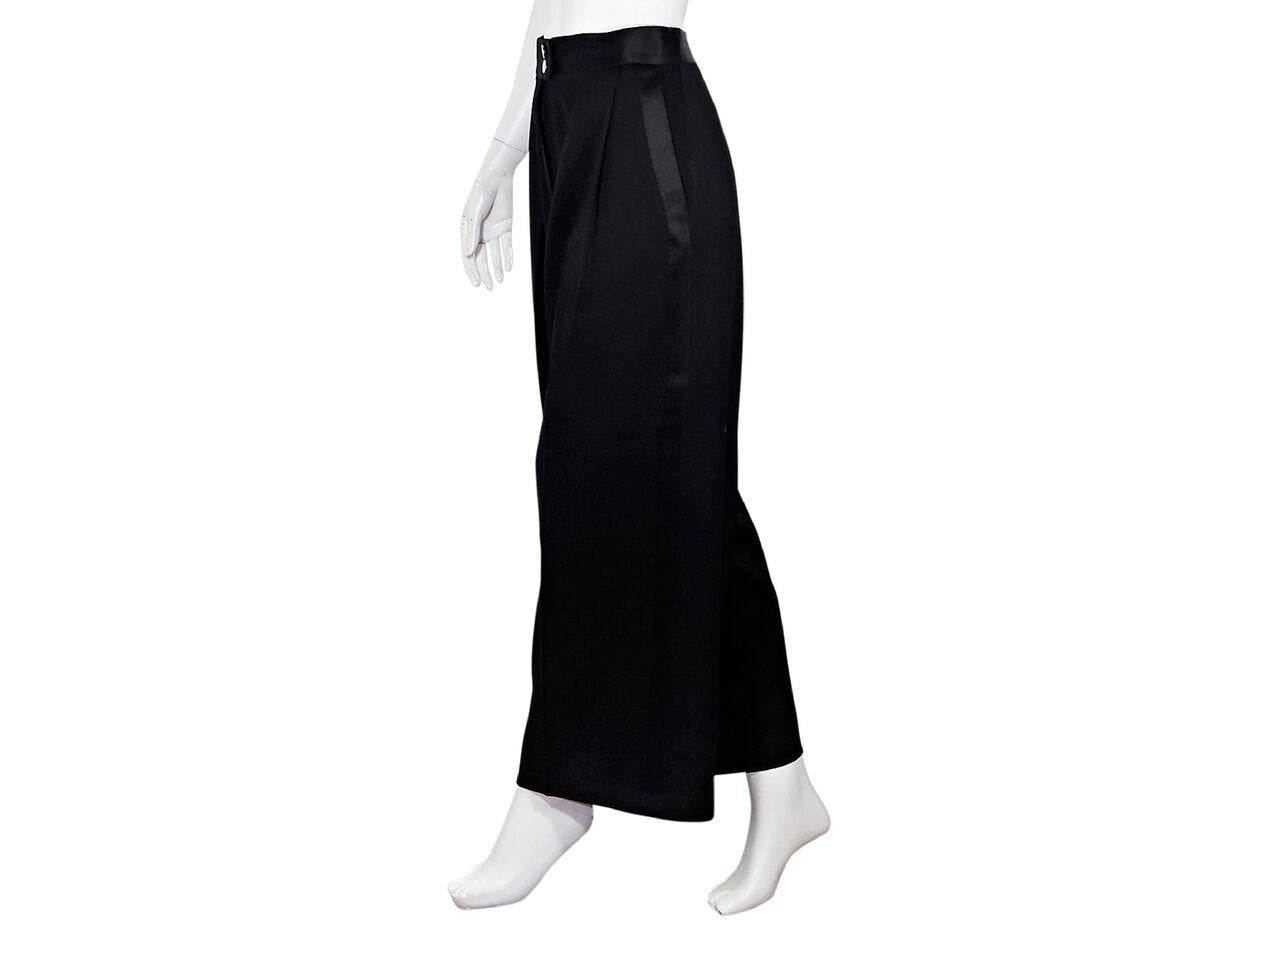 Product details:  Vintage black wool tuxedo palazzo pants by Chanel.  Banded waist.  Button and zip fly closure.  Pleated front.  Waist slide pockets.  28.5